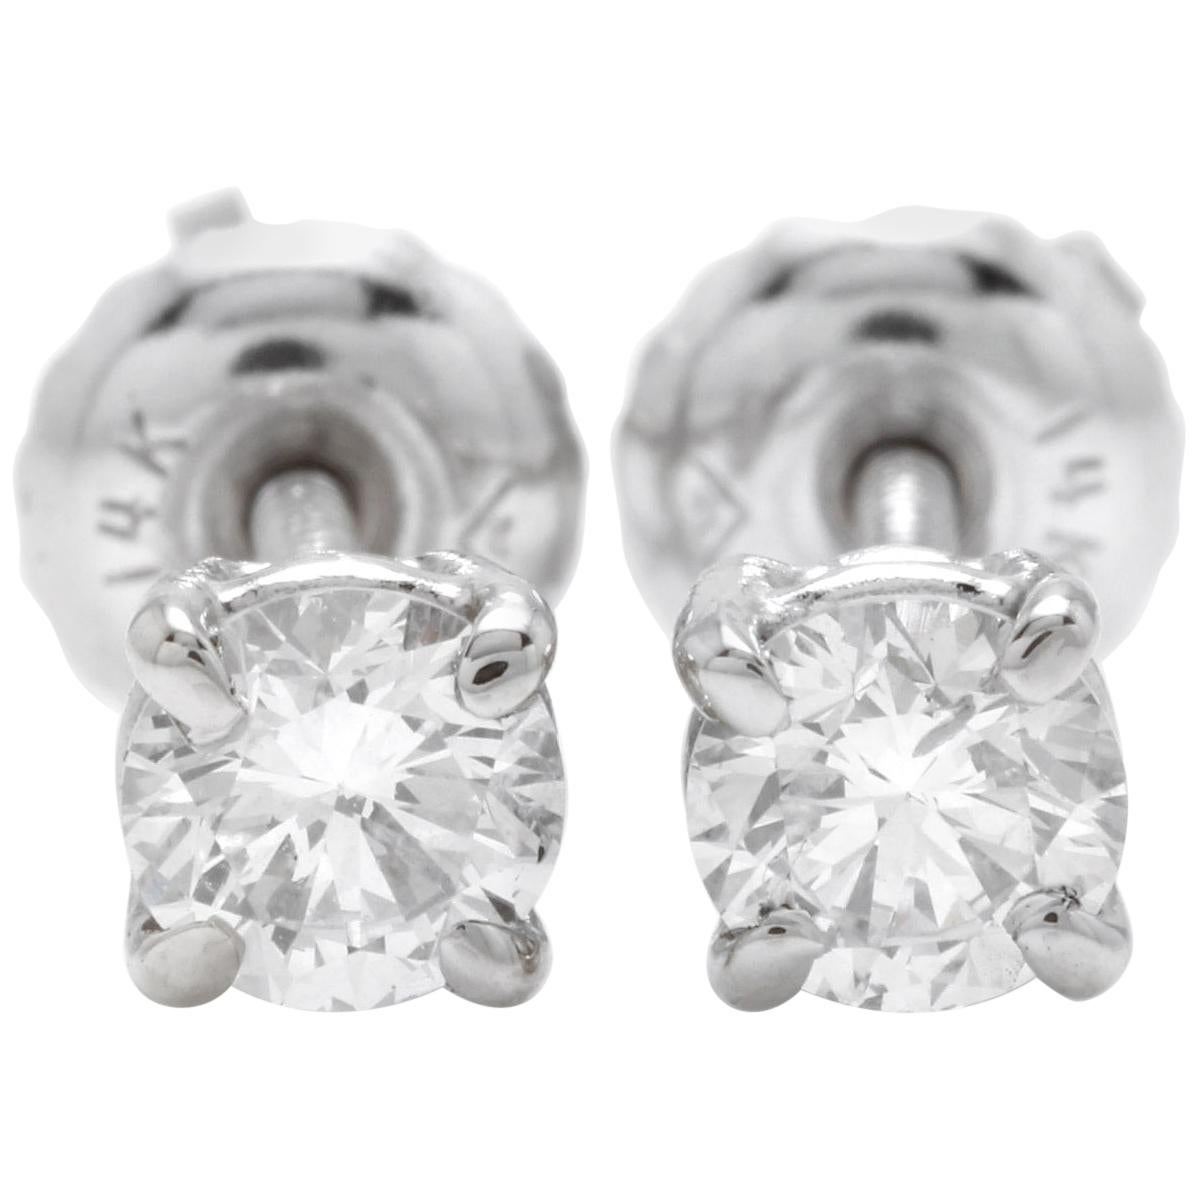 Exquisite 0.40 Carat Natural Diamond 14 Karat Solid White Gold Stud Earrings For Sale